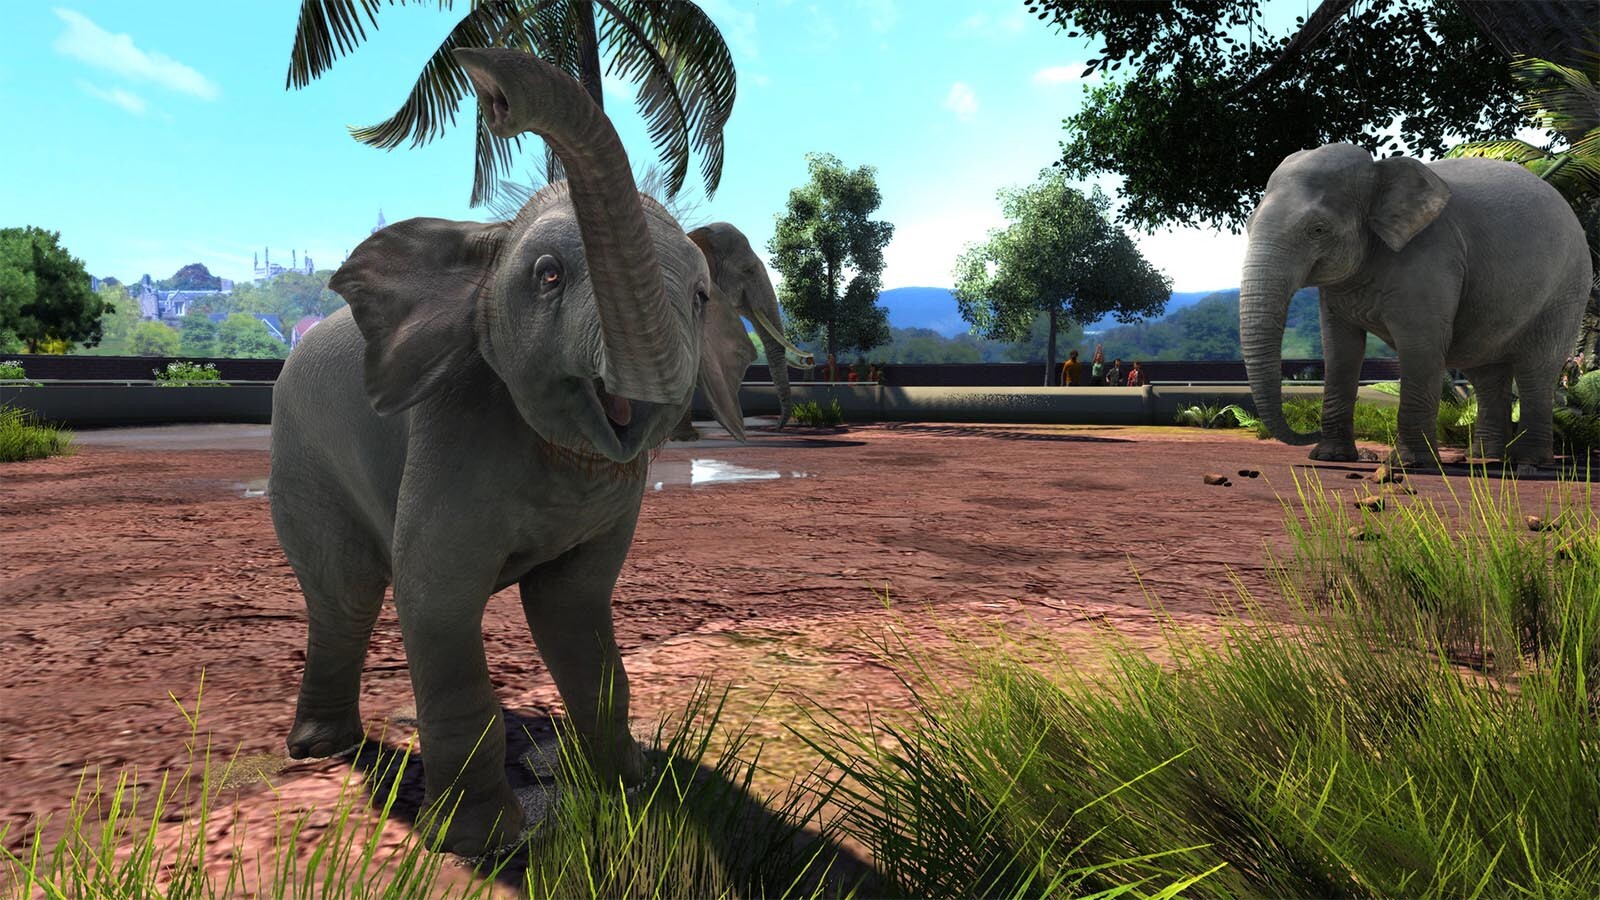 zoo tycoon 2 ultimate collection pc